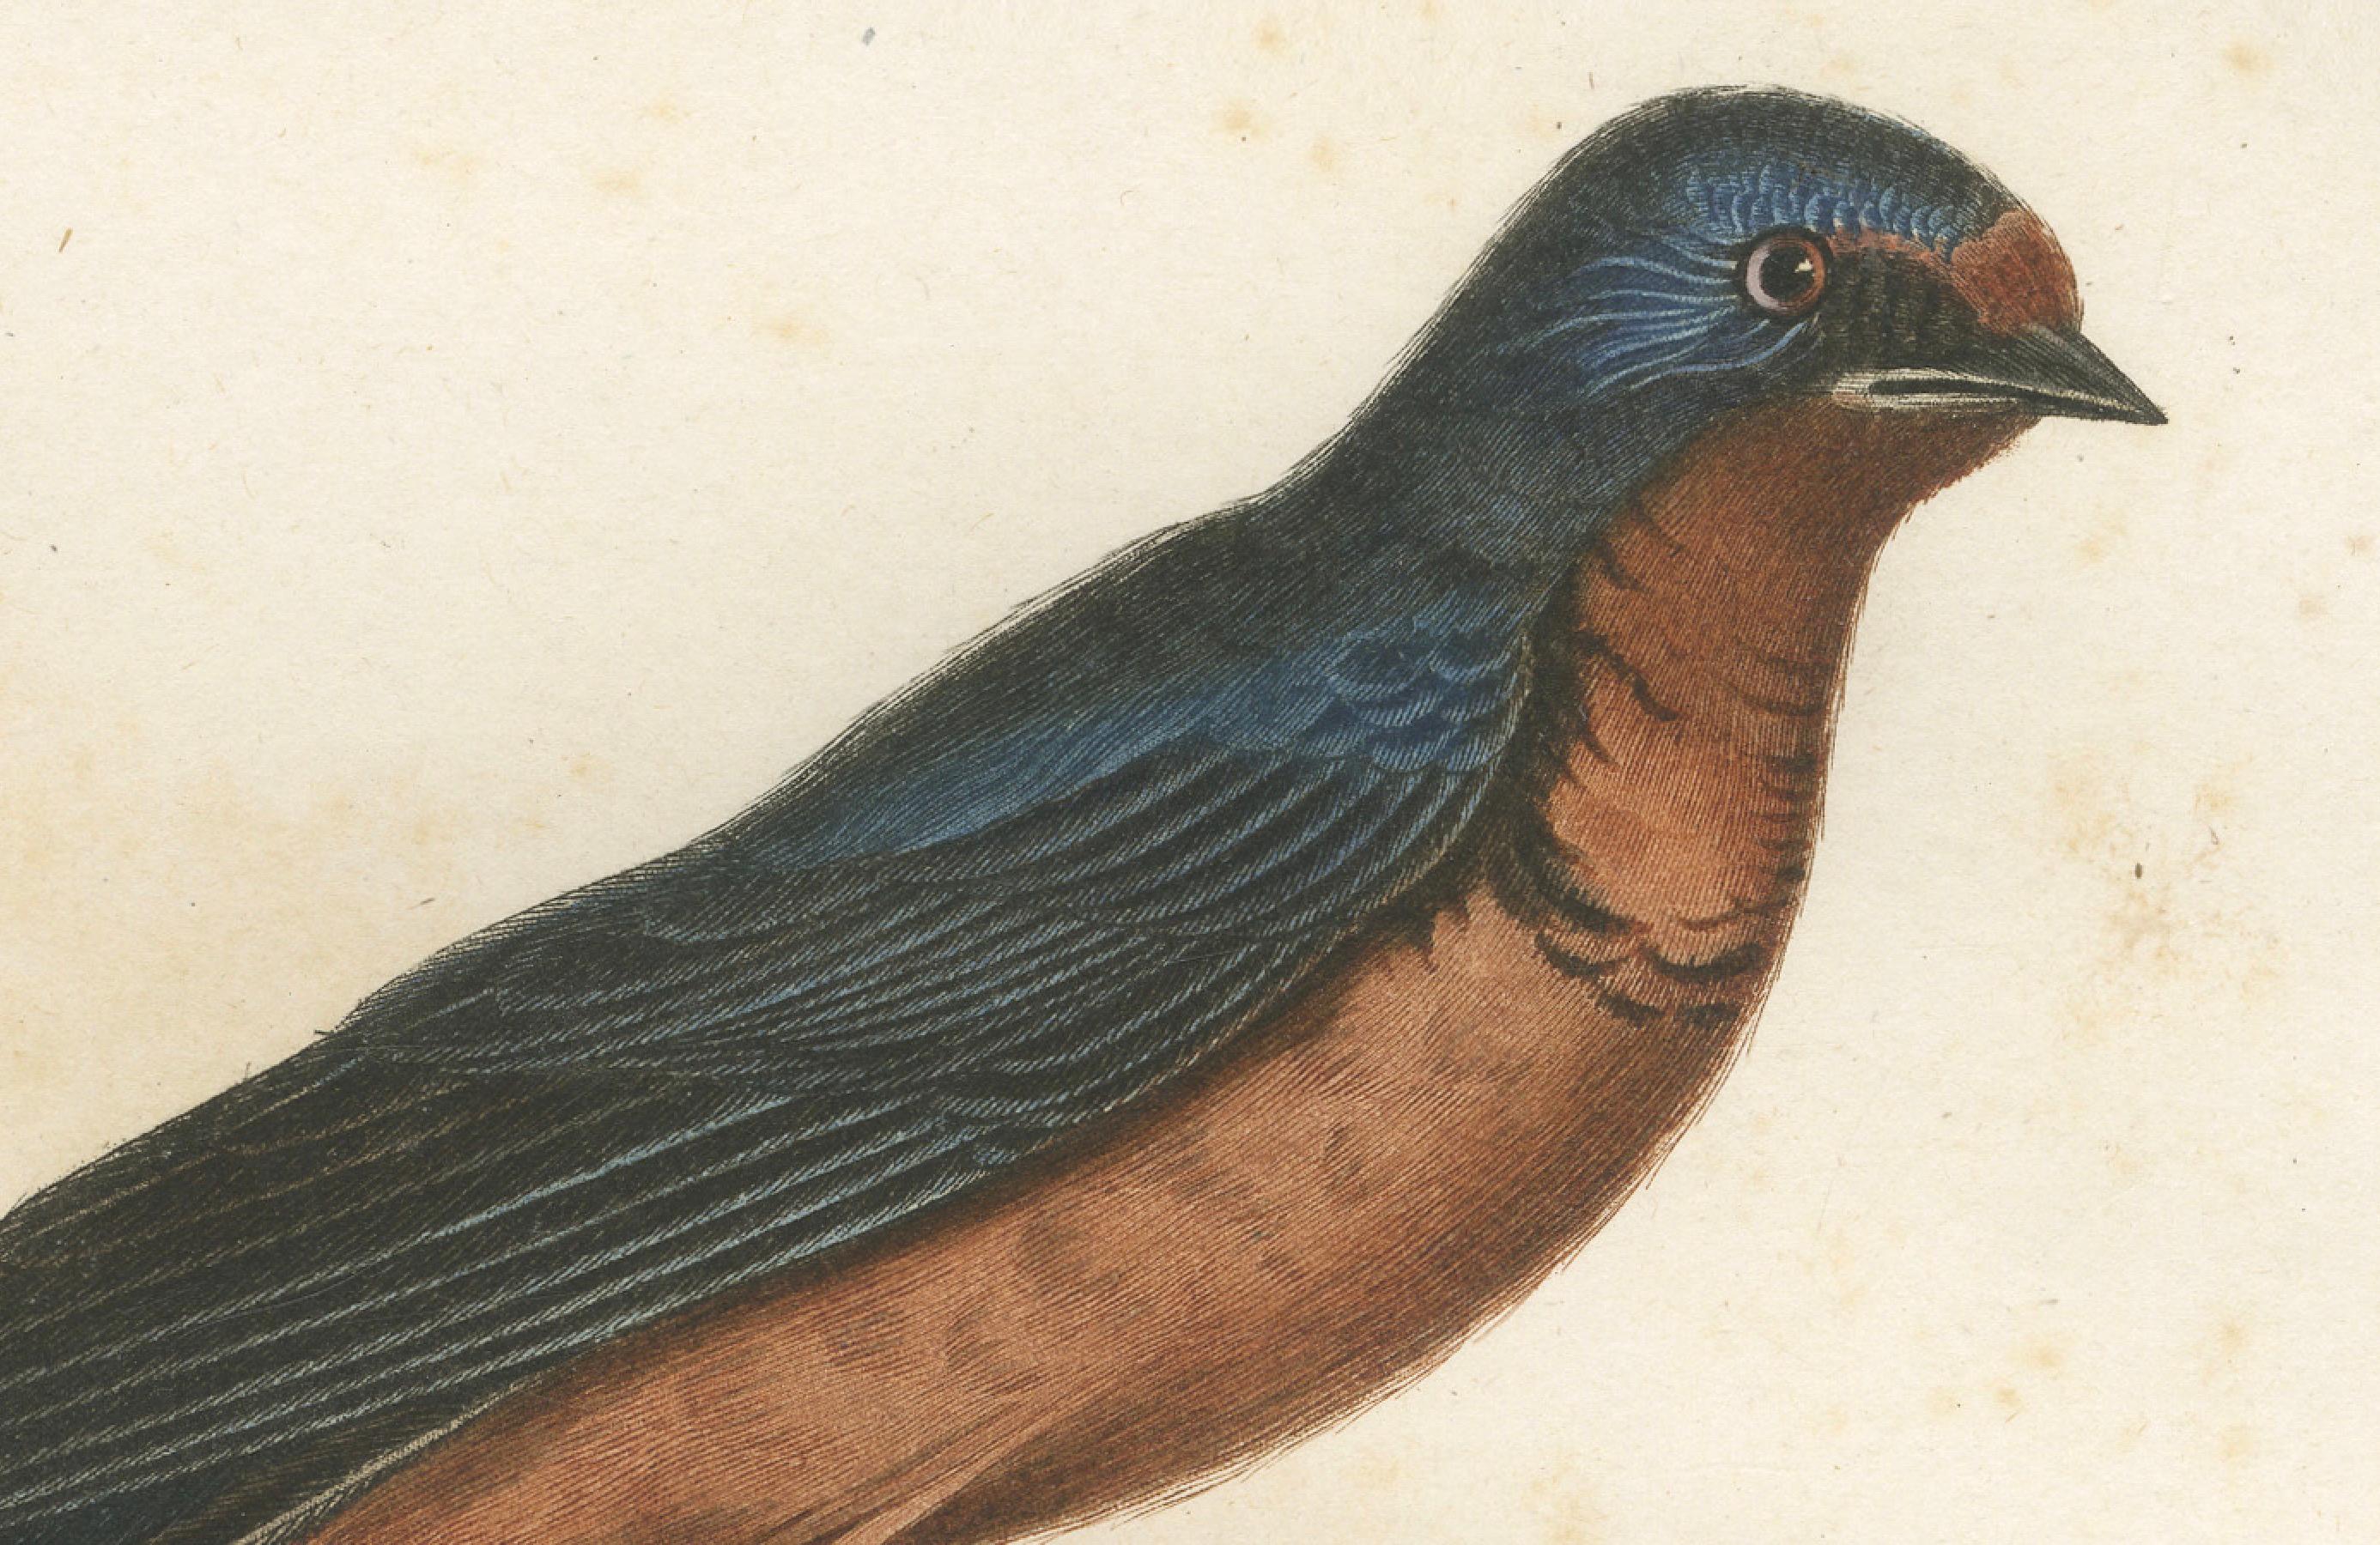 This handcolored antique print, entitled 'L'Hirondelle Rousse', depicts a red-breasted swallow, also known as the rufous-chested swallow. The bird is illustrated in mid-pose, captured with its wings folded, perched on a stump. Its rich chestnut